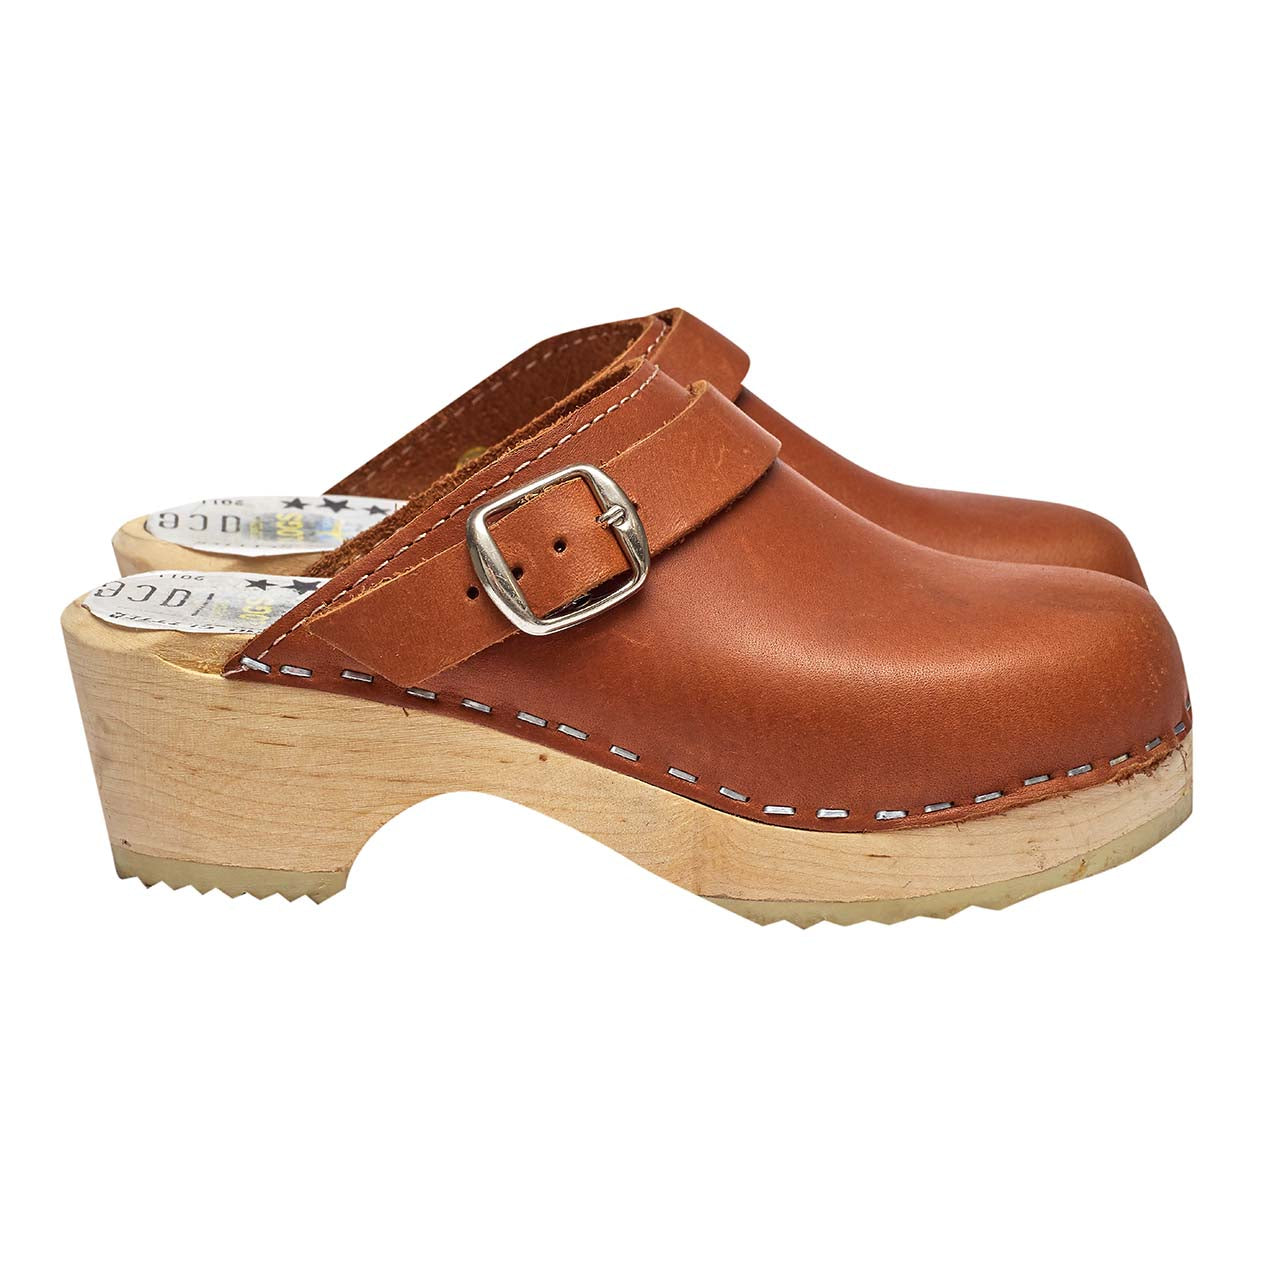 Classic Leather Clog - Coco Bean